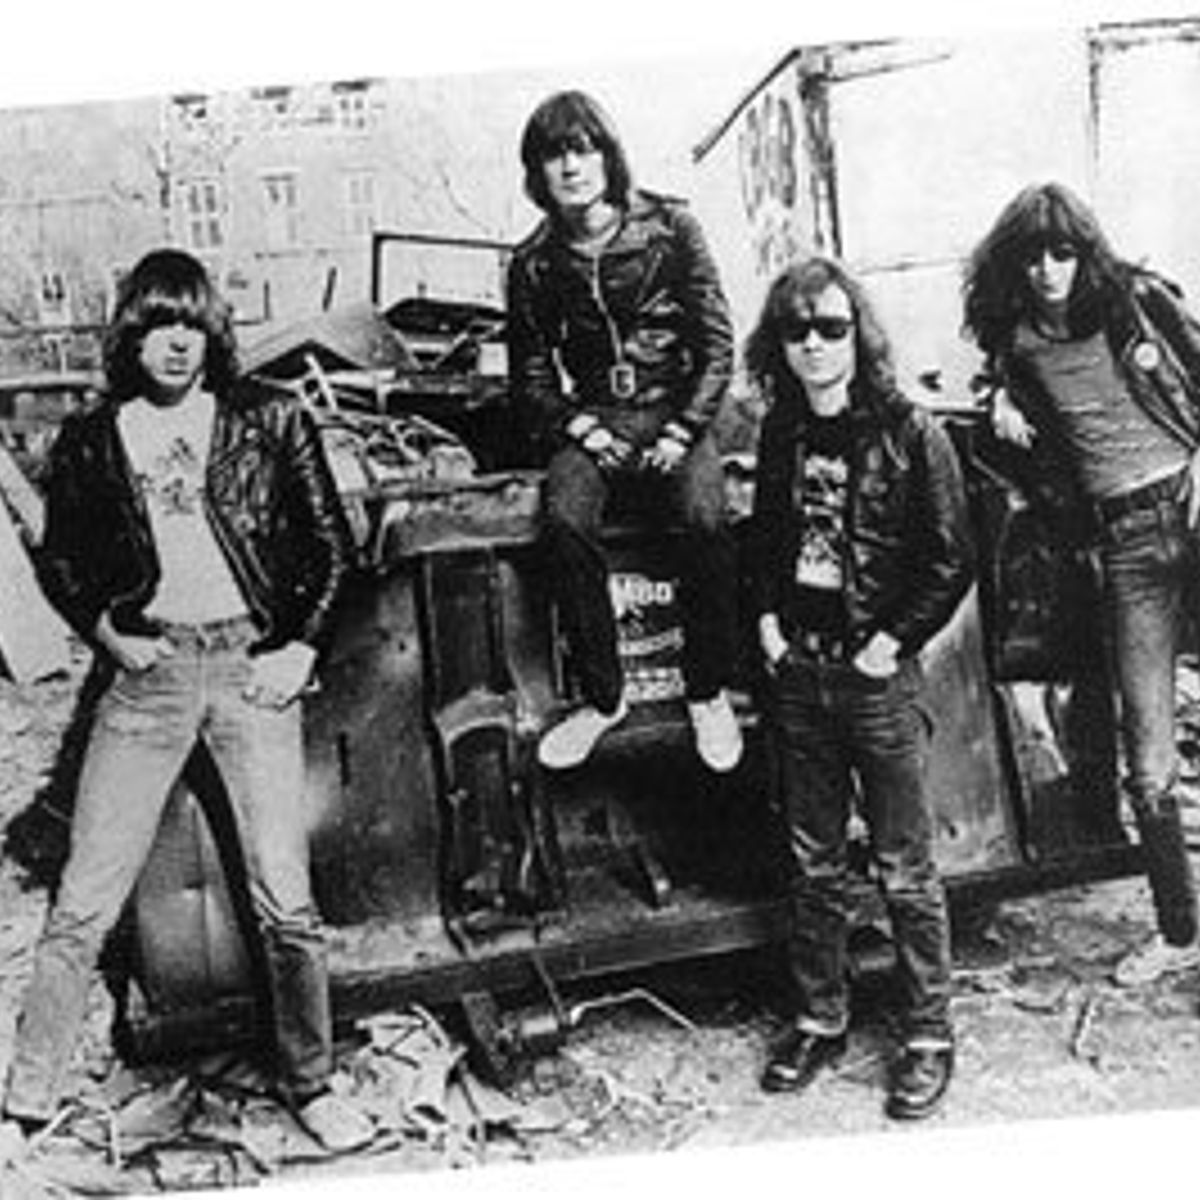 End of the Century: The Story of the Ramones - Chlotrudis Society for ...